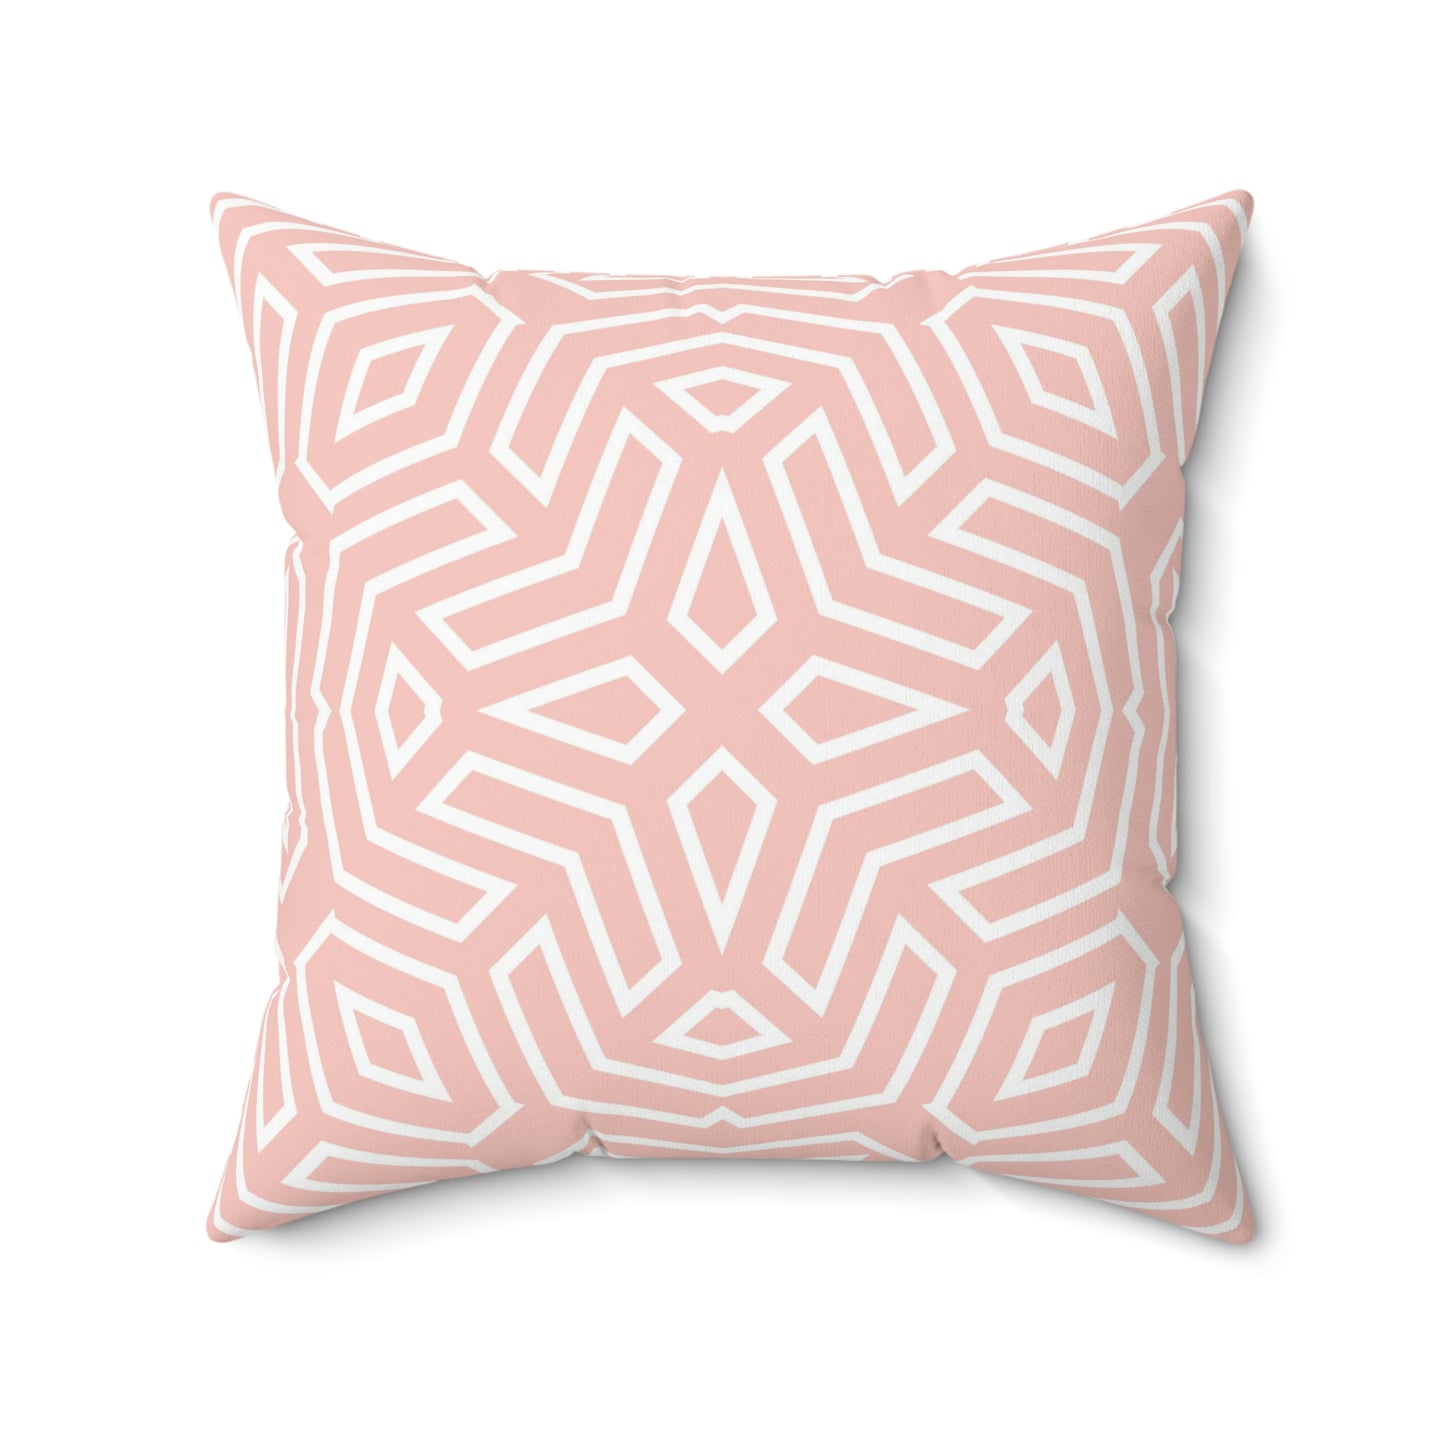 Pink Geometric Design Square Pillow Cover